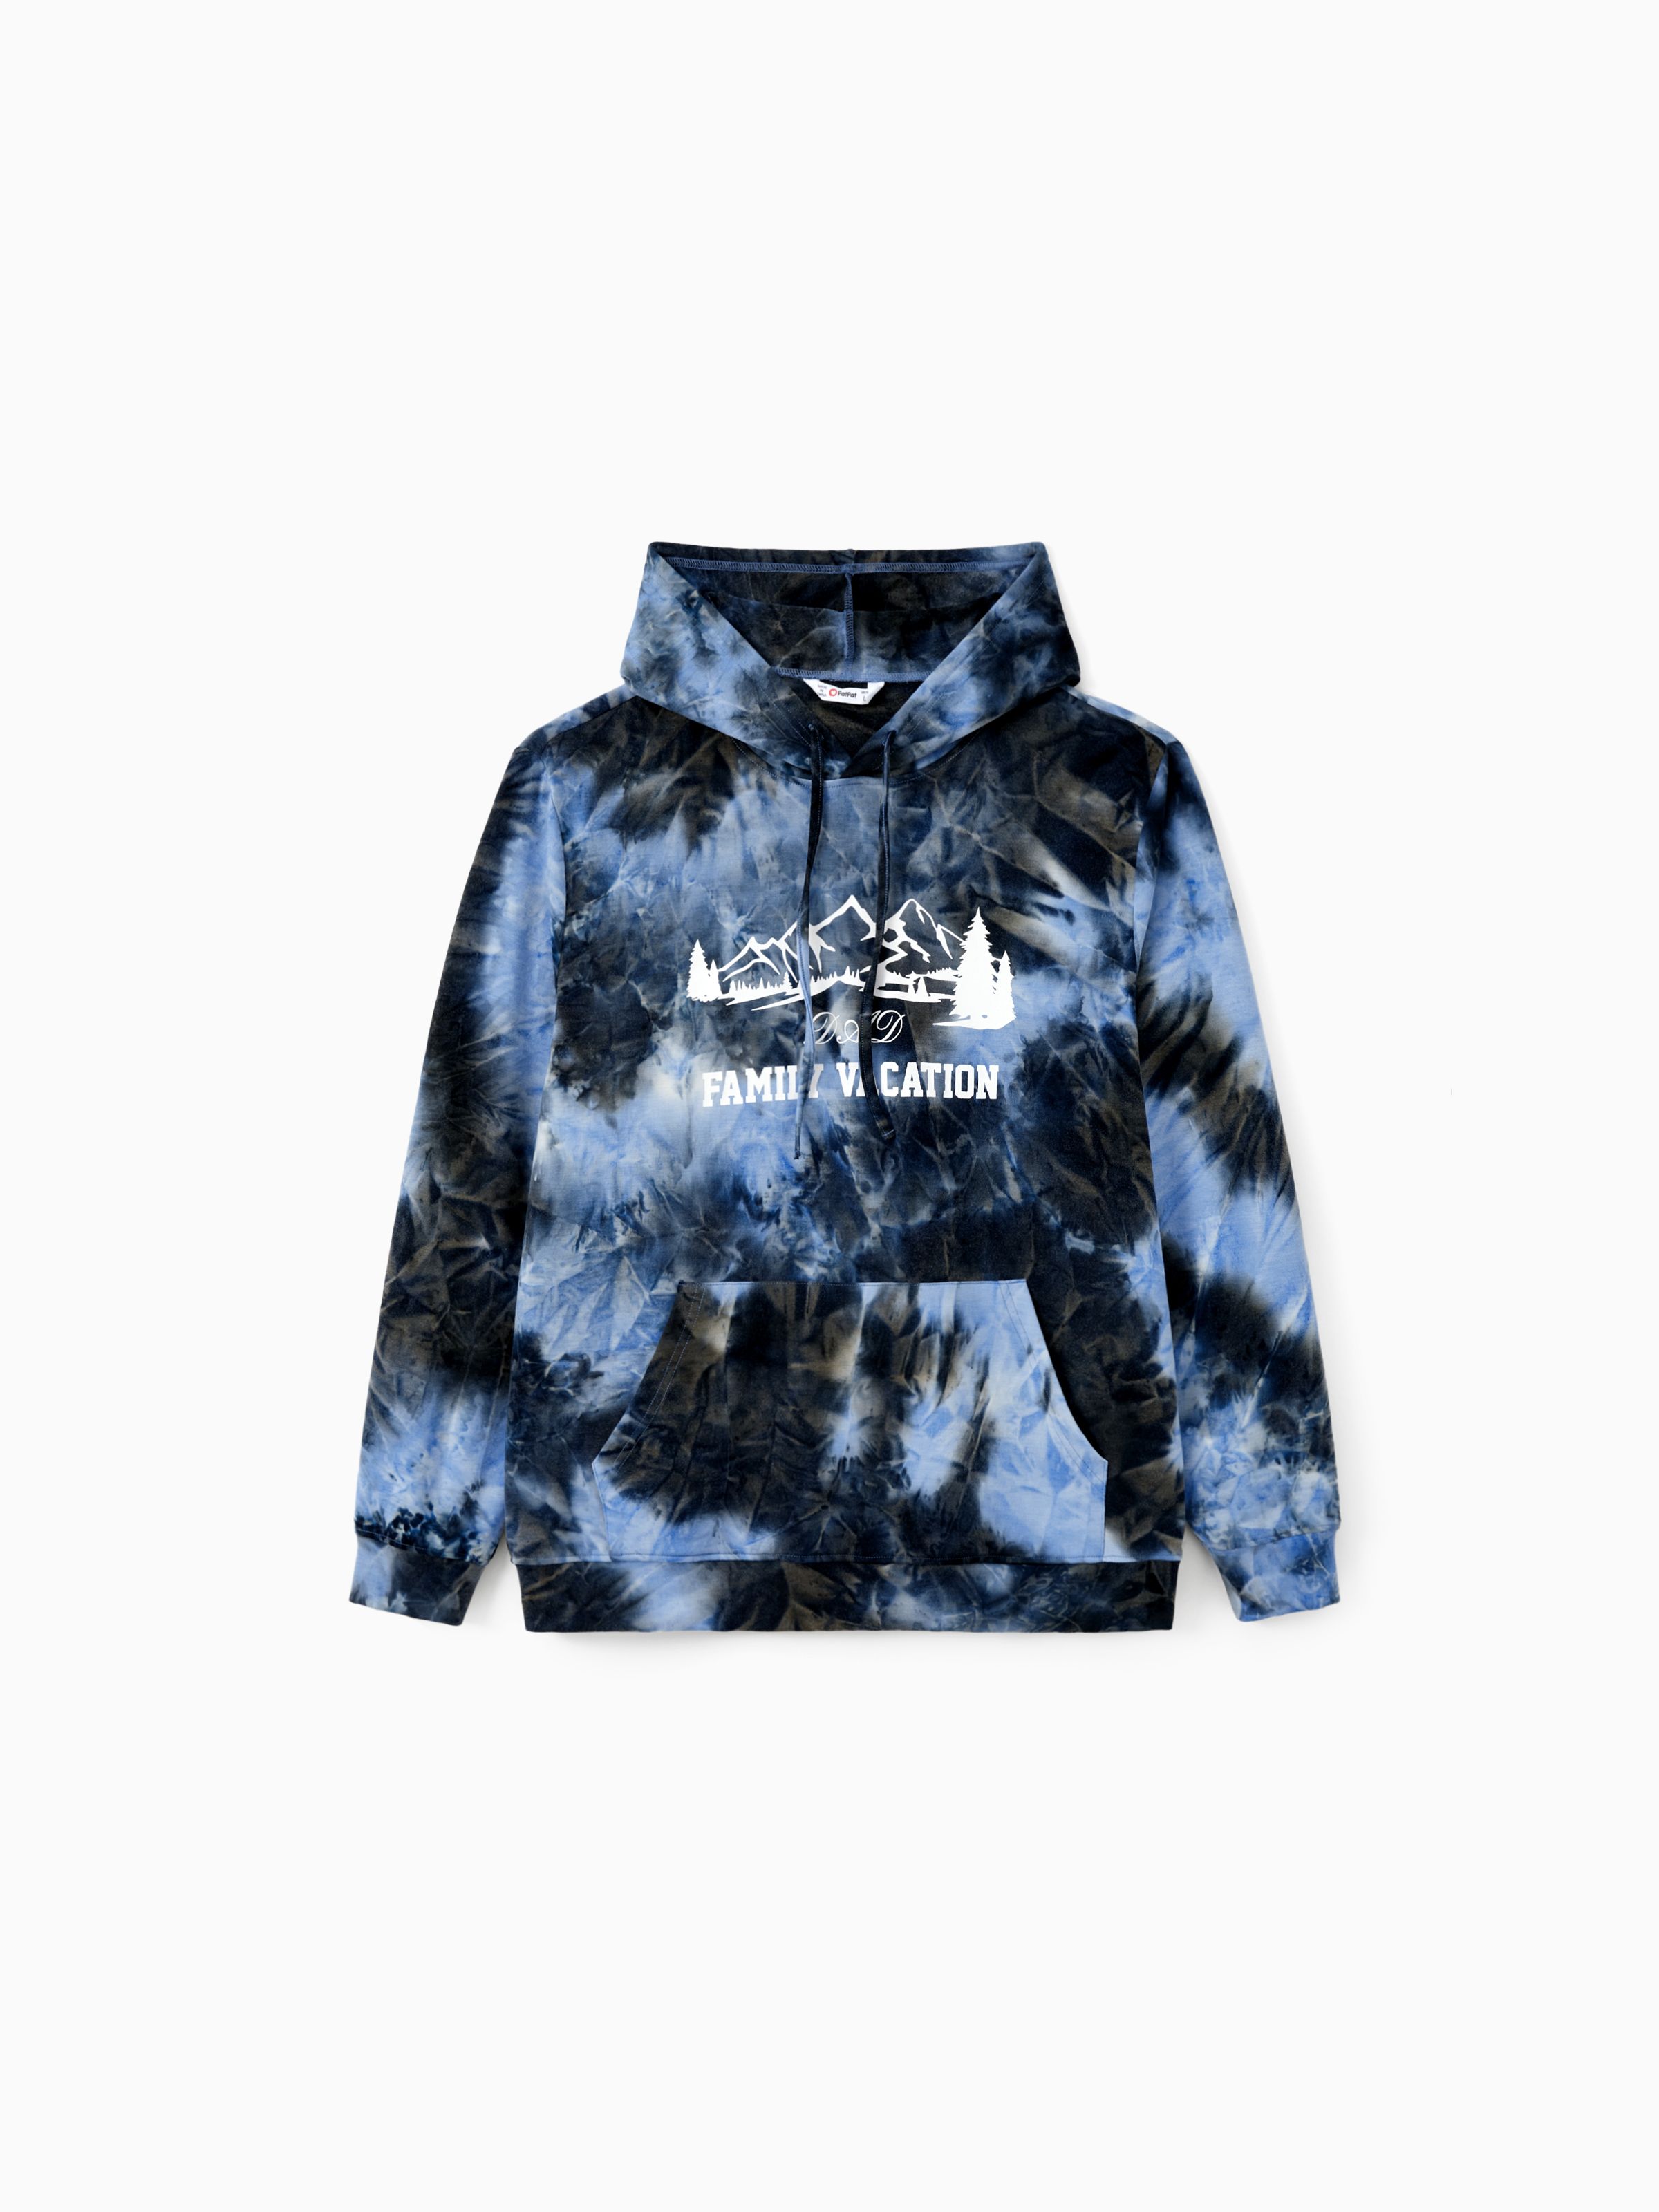 

Family Matching Tops Blue-Black Tie-Dye Family Vacation Drawstring Hoodie with Pockets